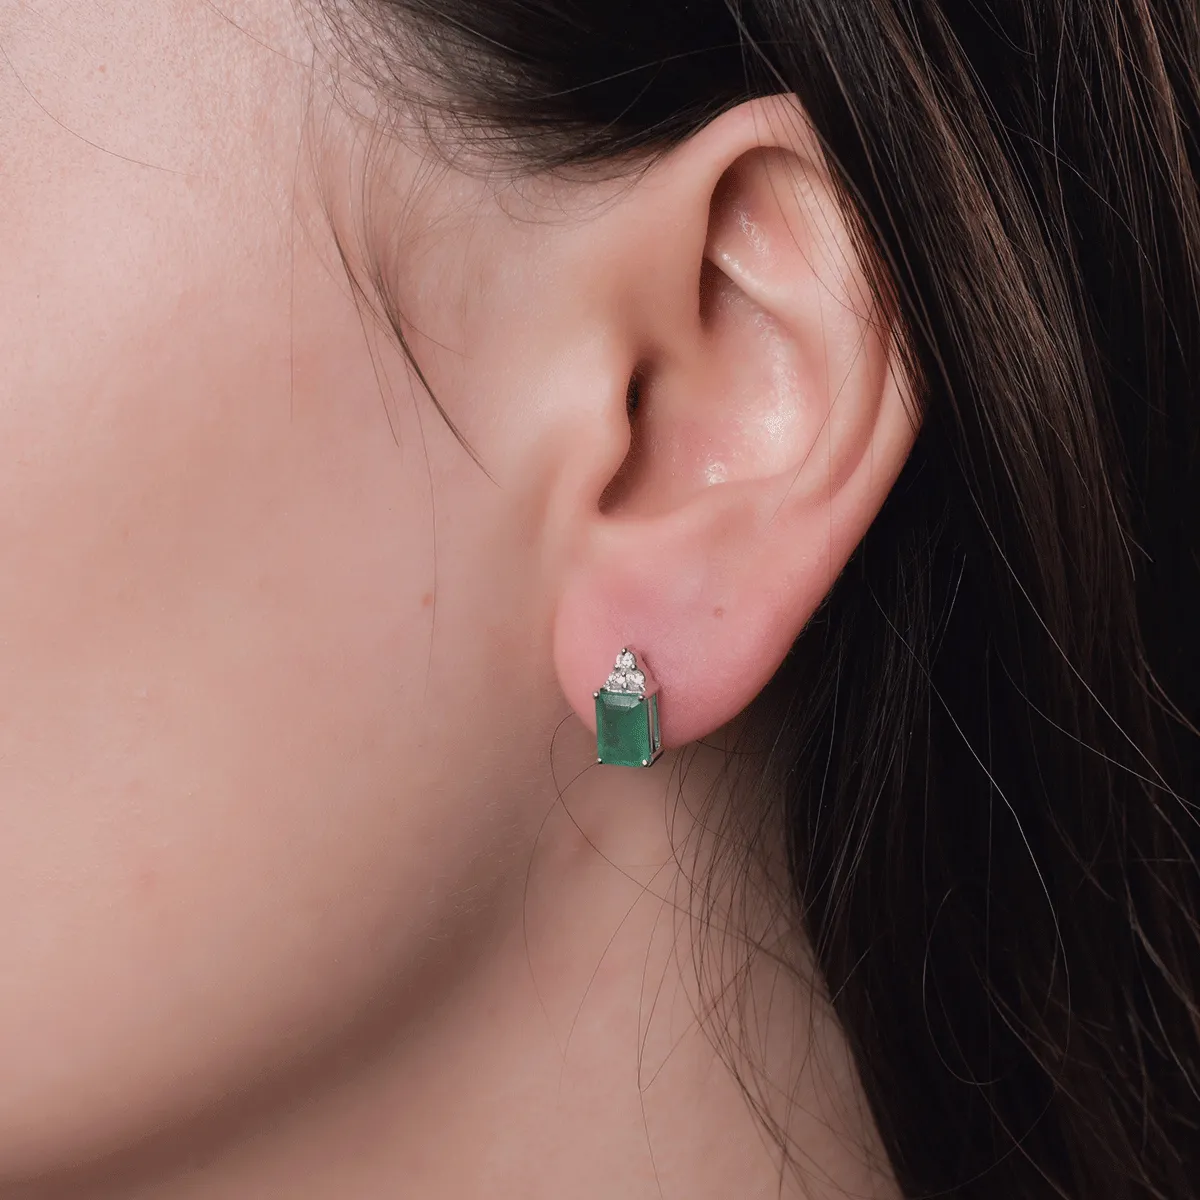 14K white gold earrings with 2.04ct emeralds and 0.13ct diamonds